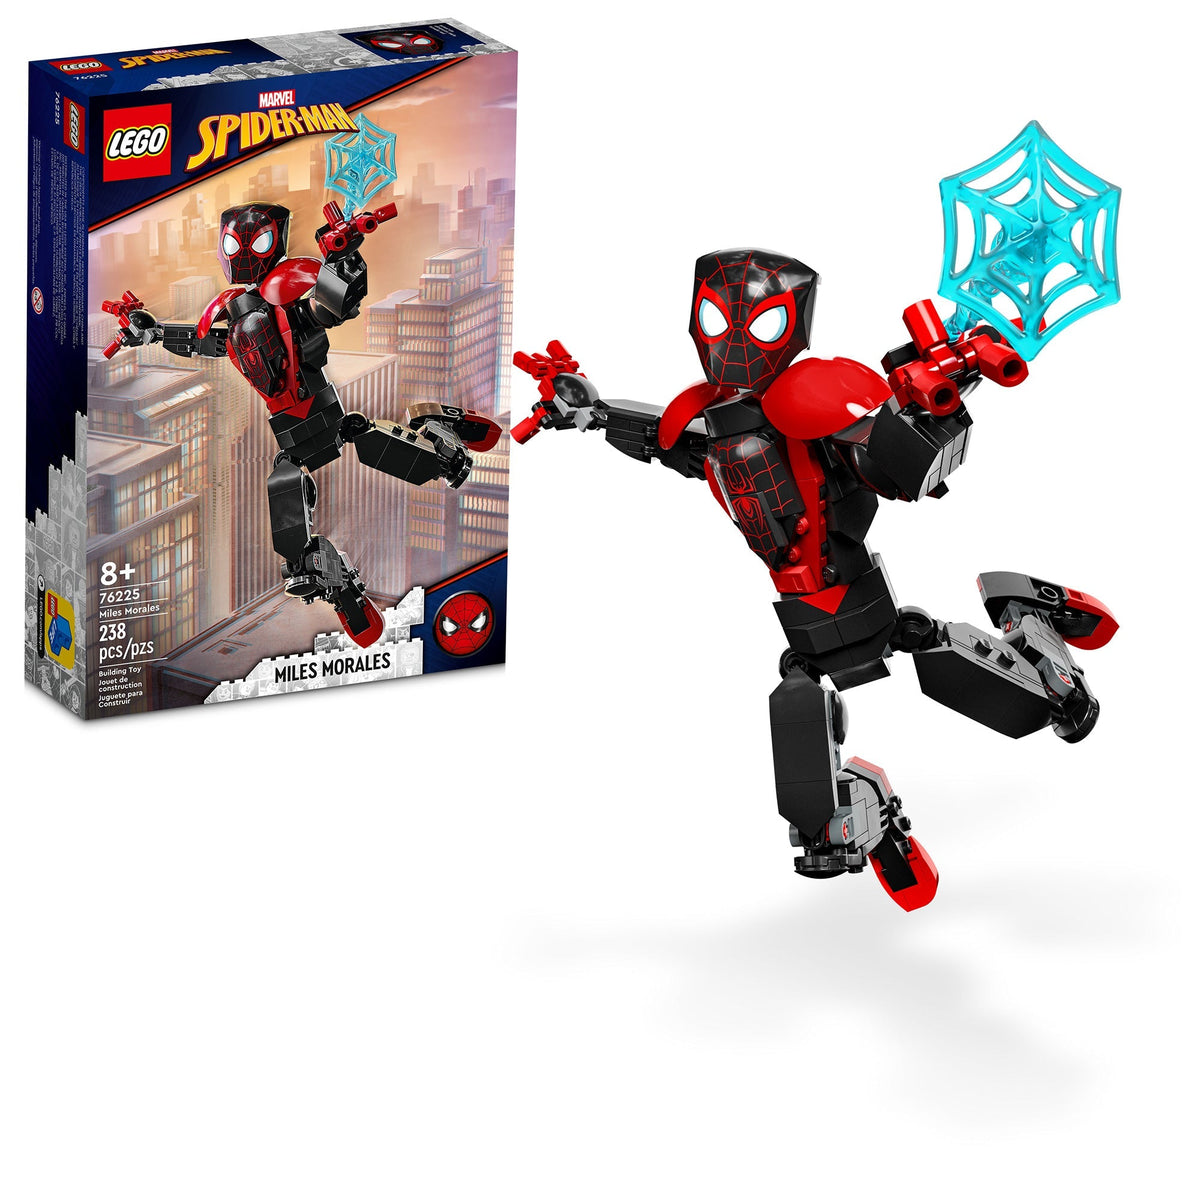 LEGO Toys & Games LEGO Marvel Miles Morales Figure, 76225, Ages 8+, 238 Pieces 673419356589